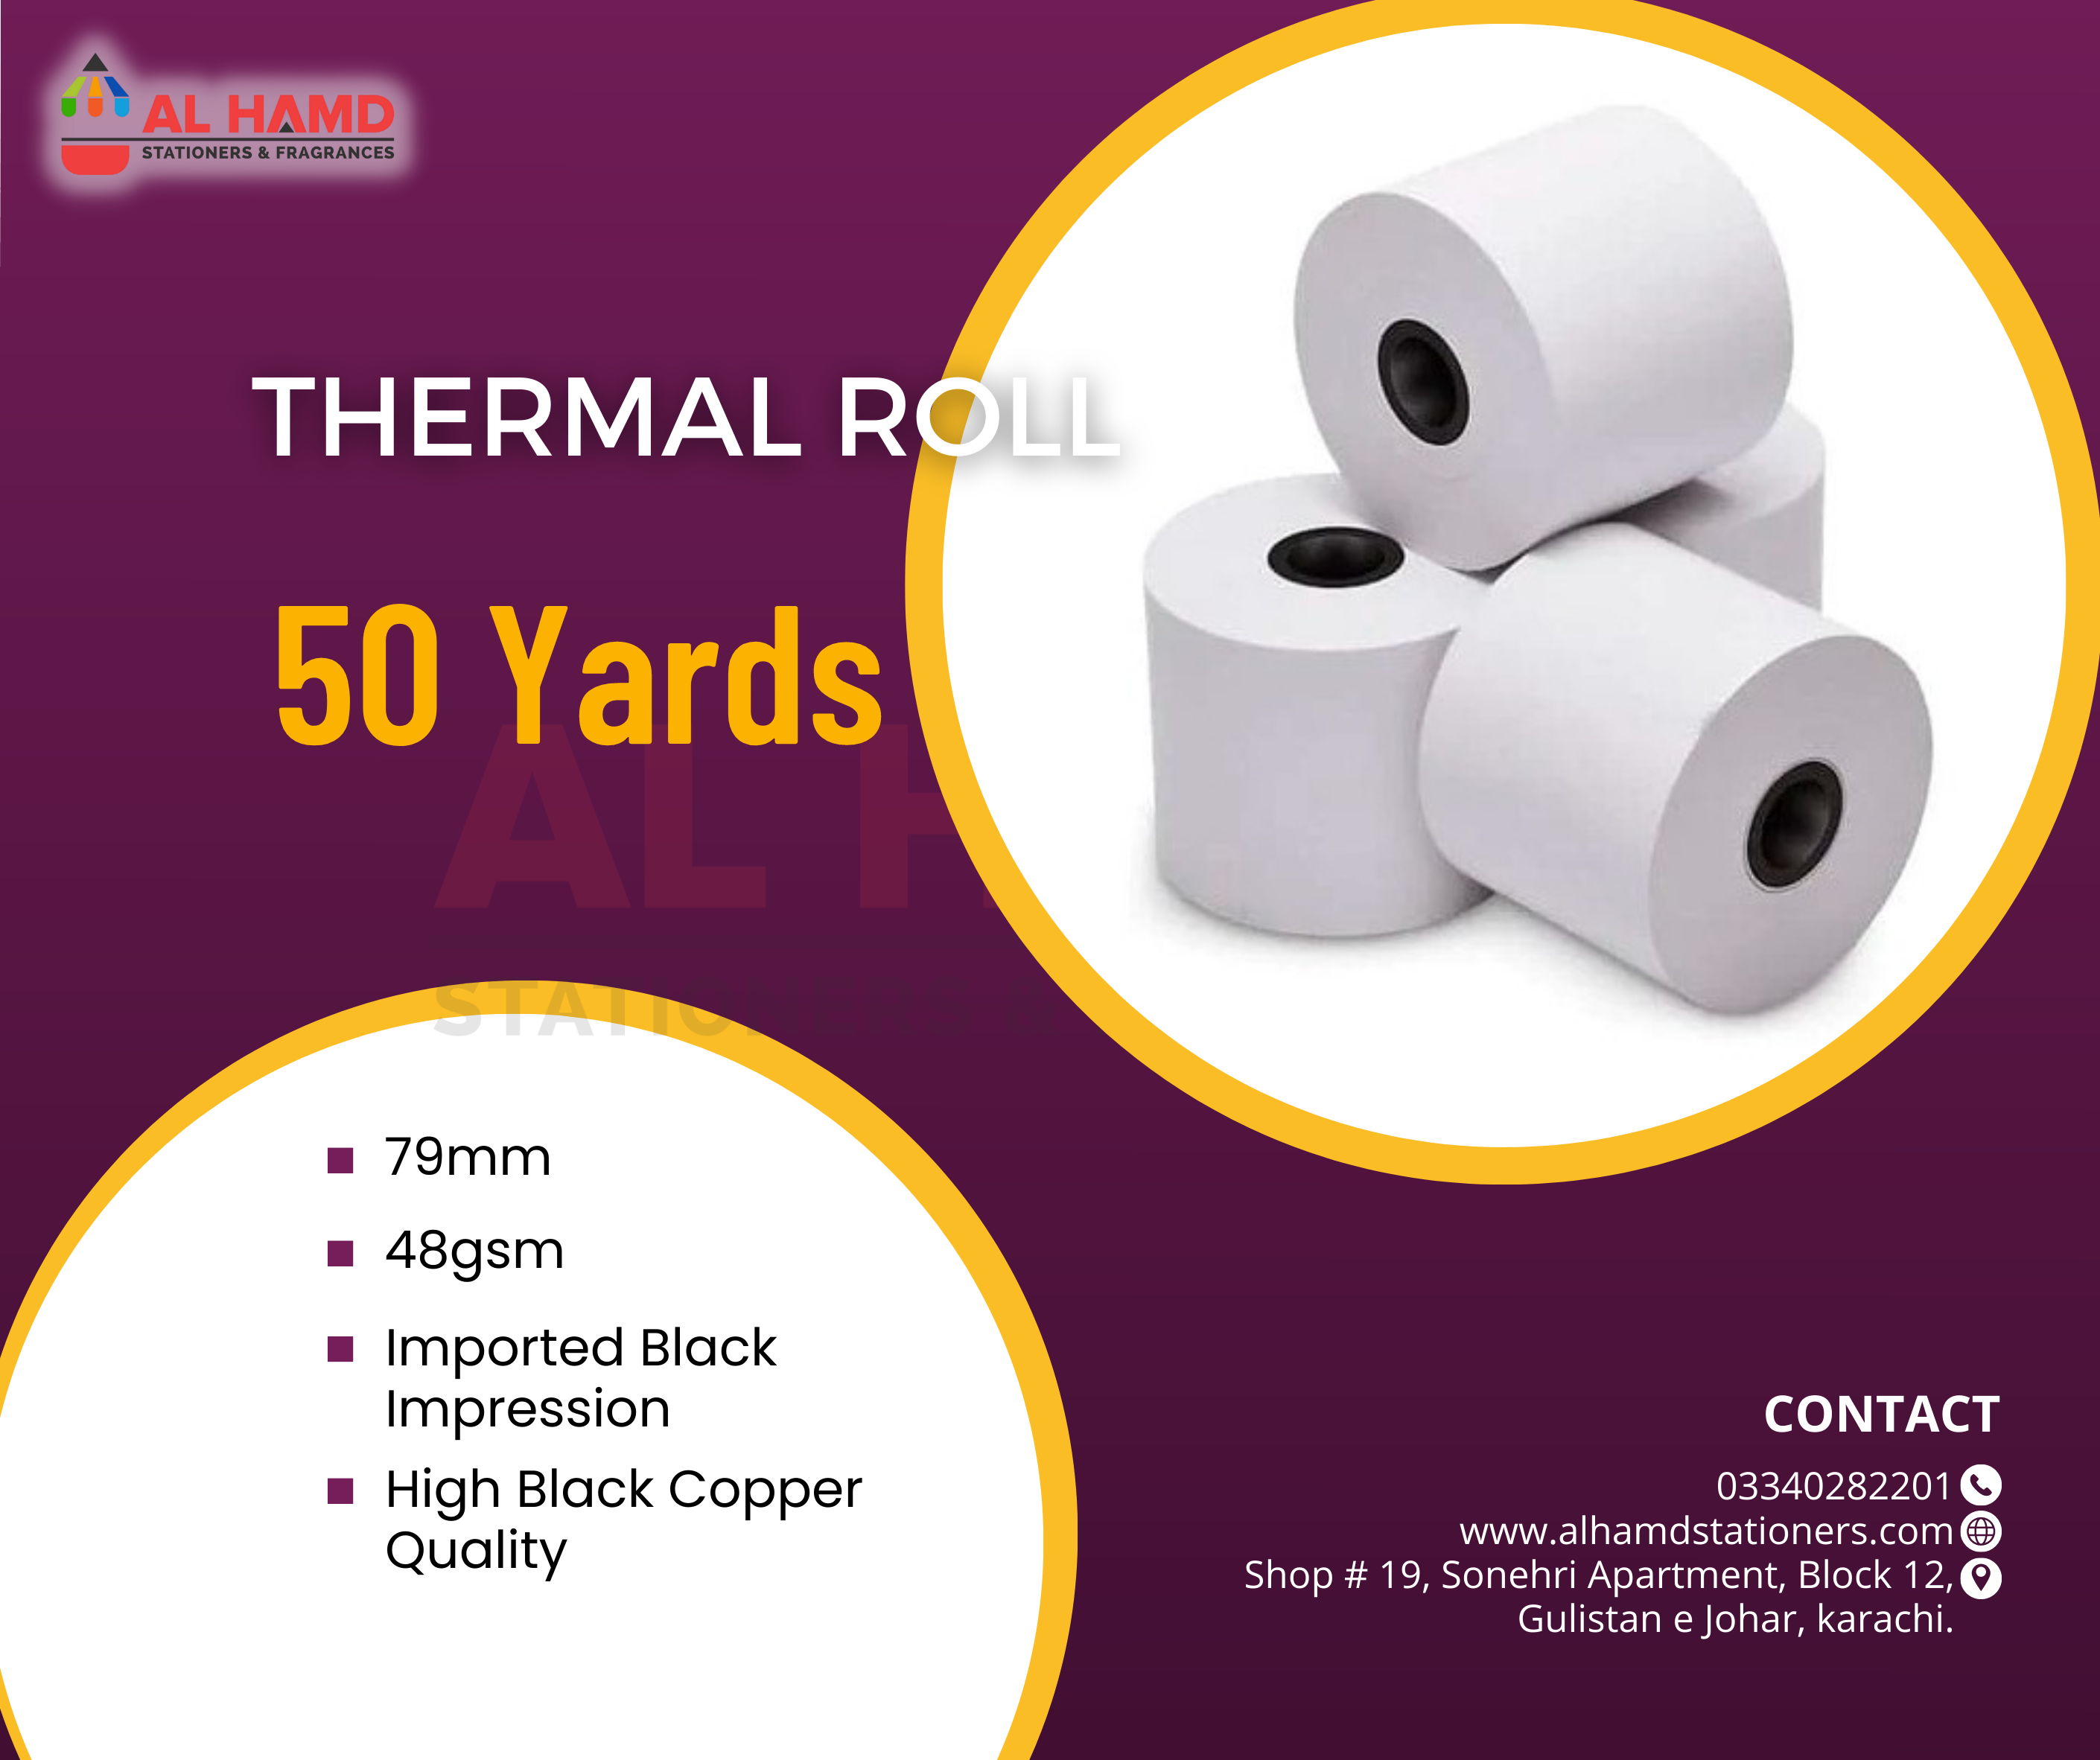 Thermal Paper Roll 79mm 50Yards 48gsm (Imported Black Impression) High Black Copper Quality TR7950y